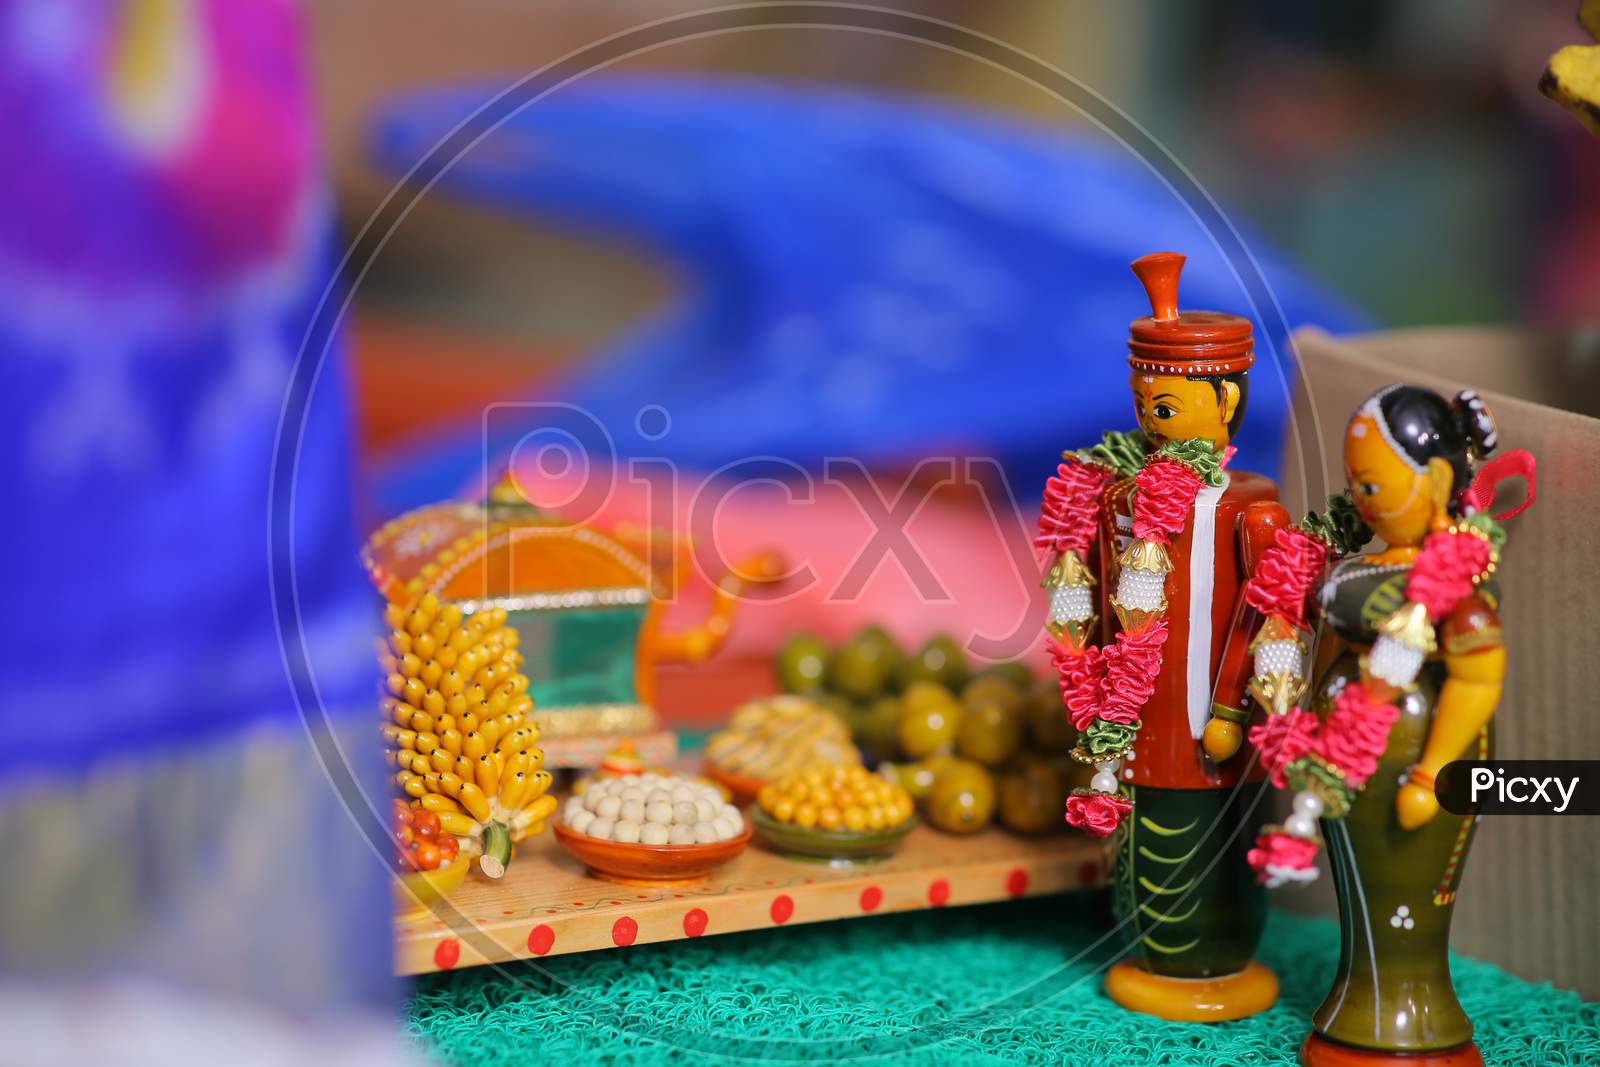 Figurines of a Couple during wedding puja